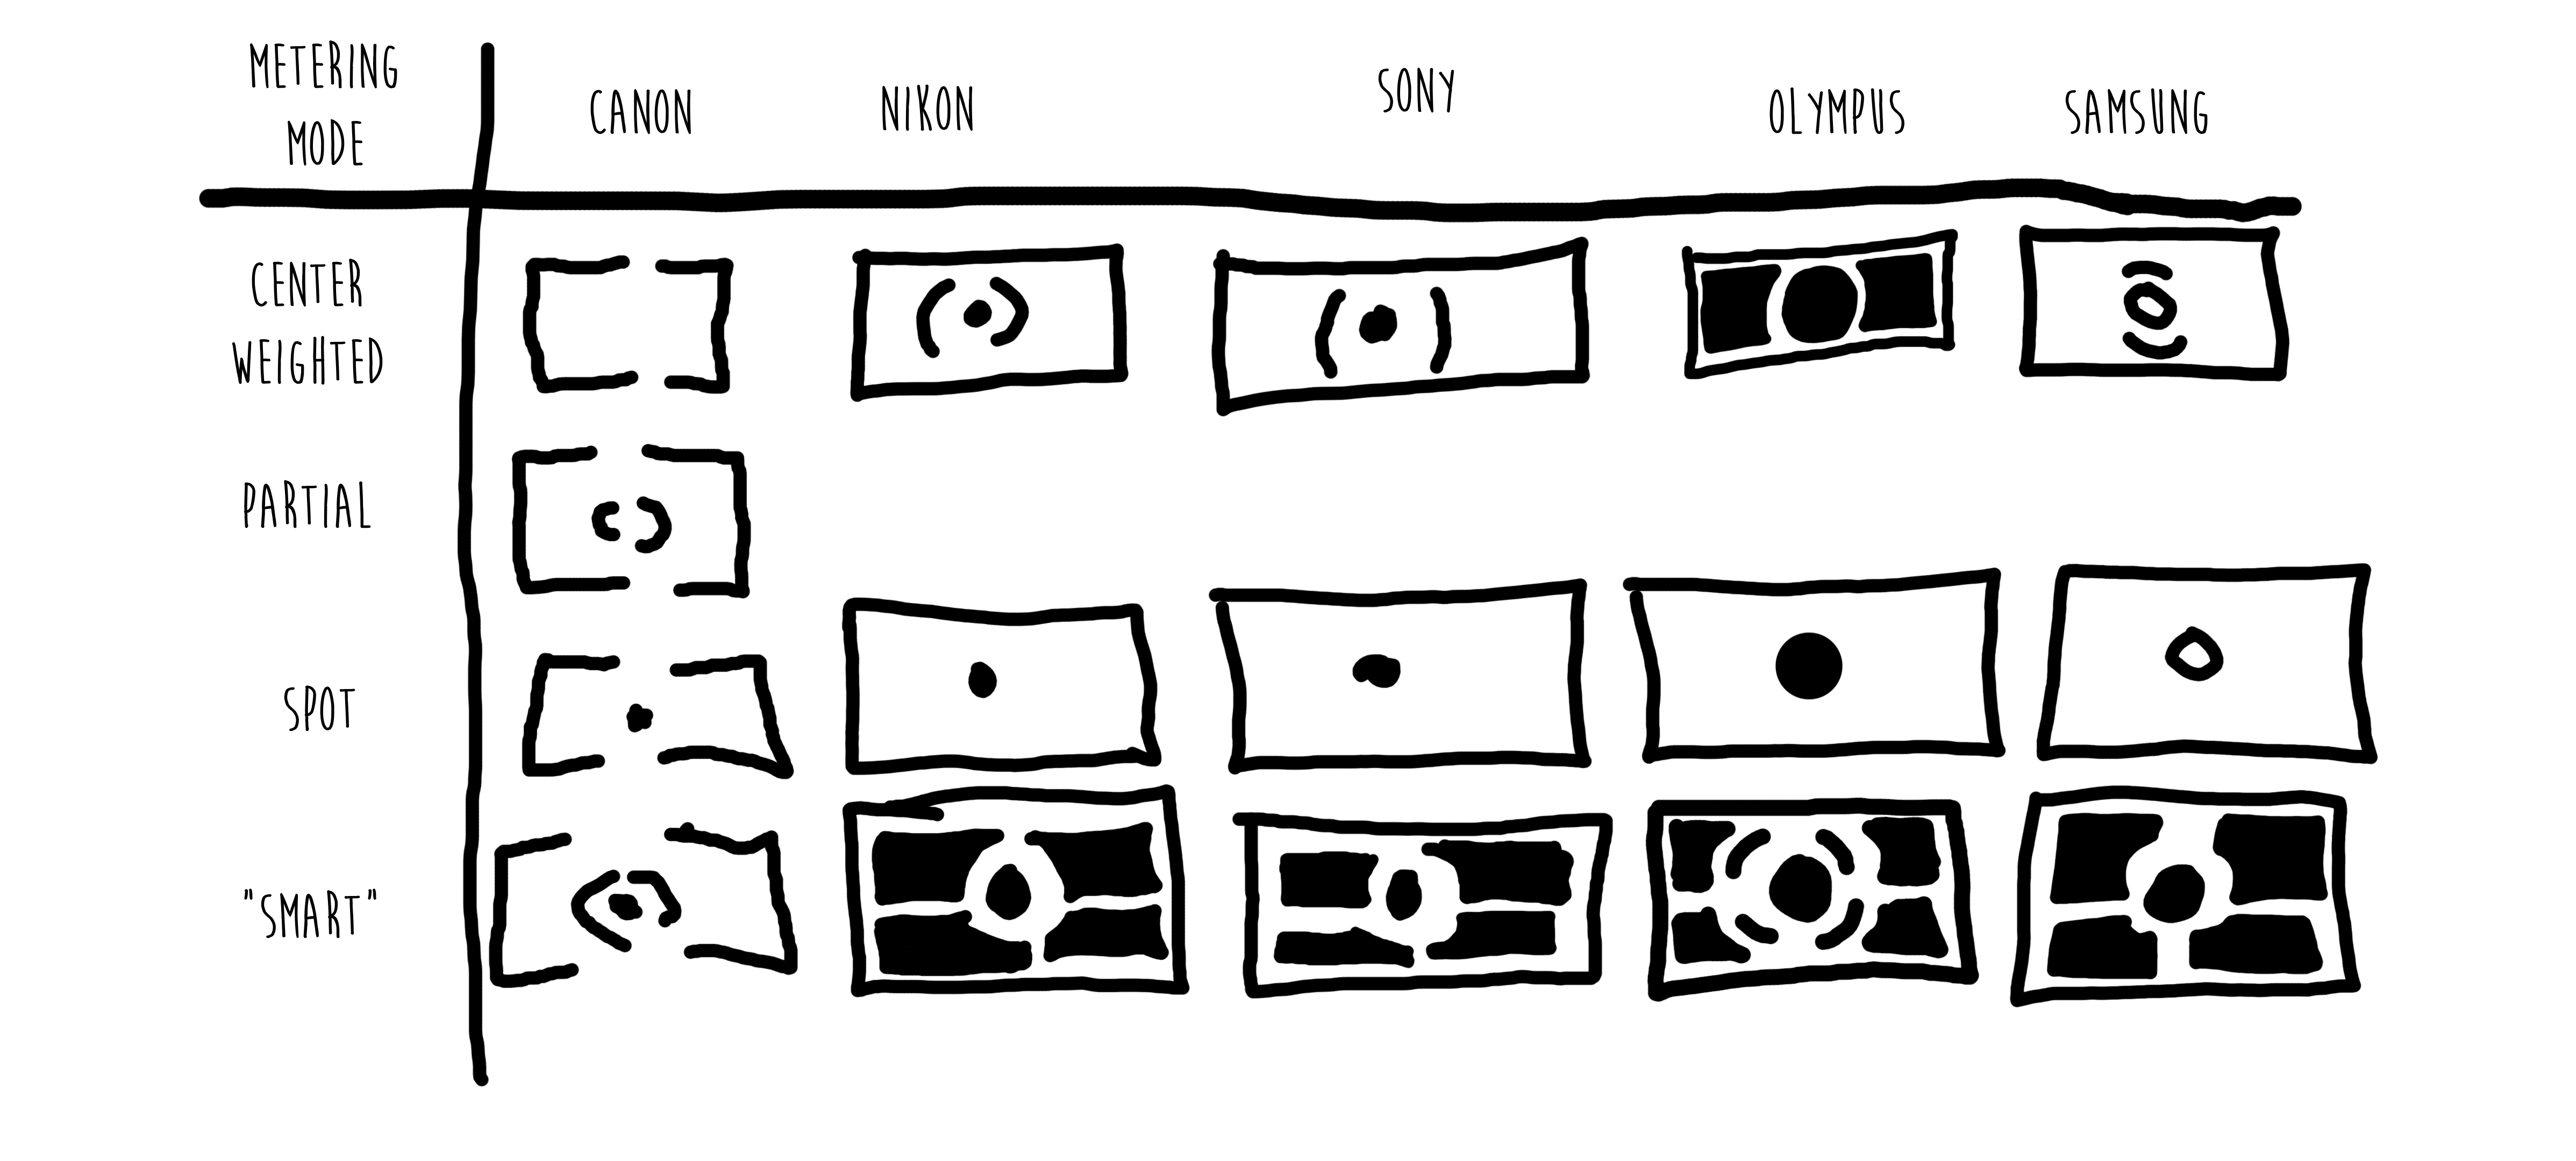 Icons of the Metering Modes